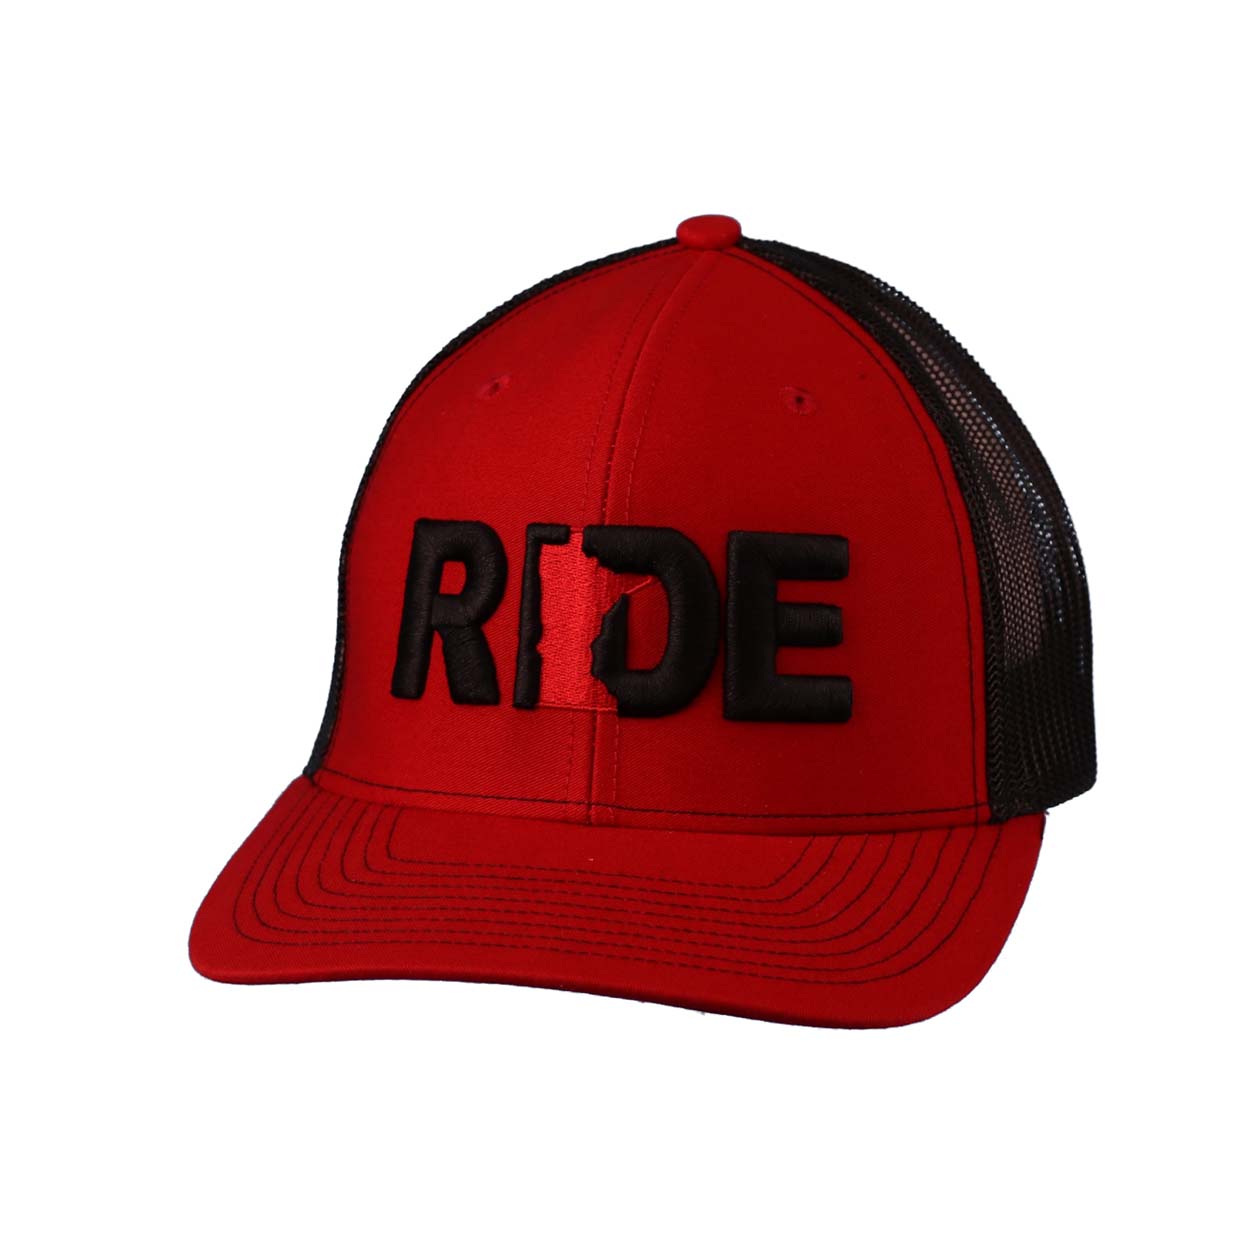 Ride Minnesota Classic Embroidered Snapback Trucker Hat Red/Black